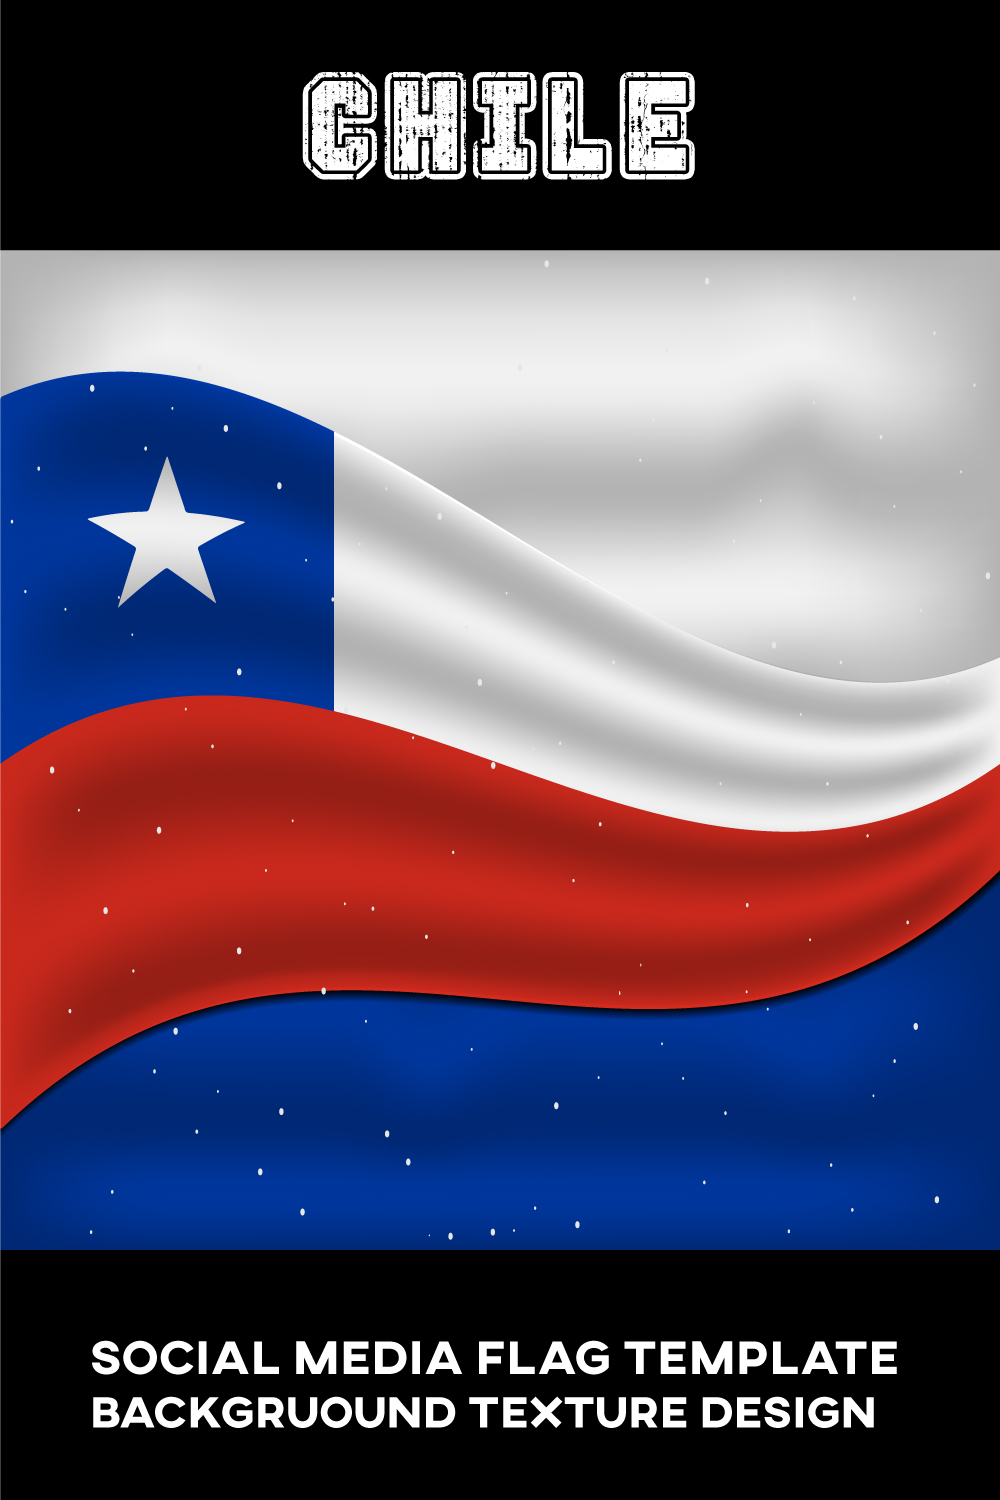 Gorgeous image of the flag of Chile.